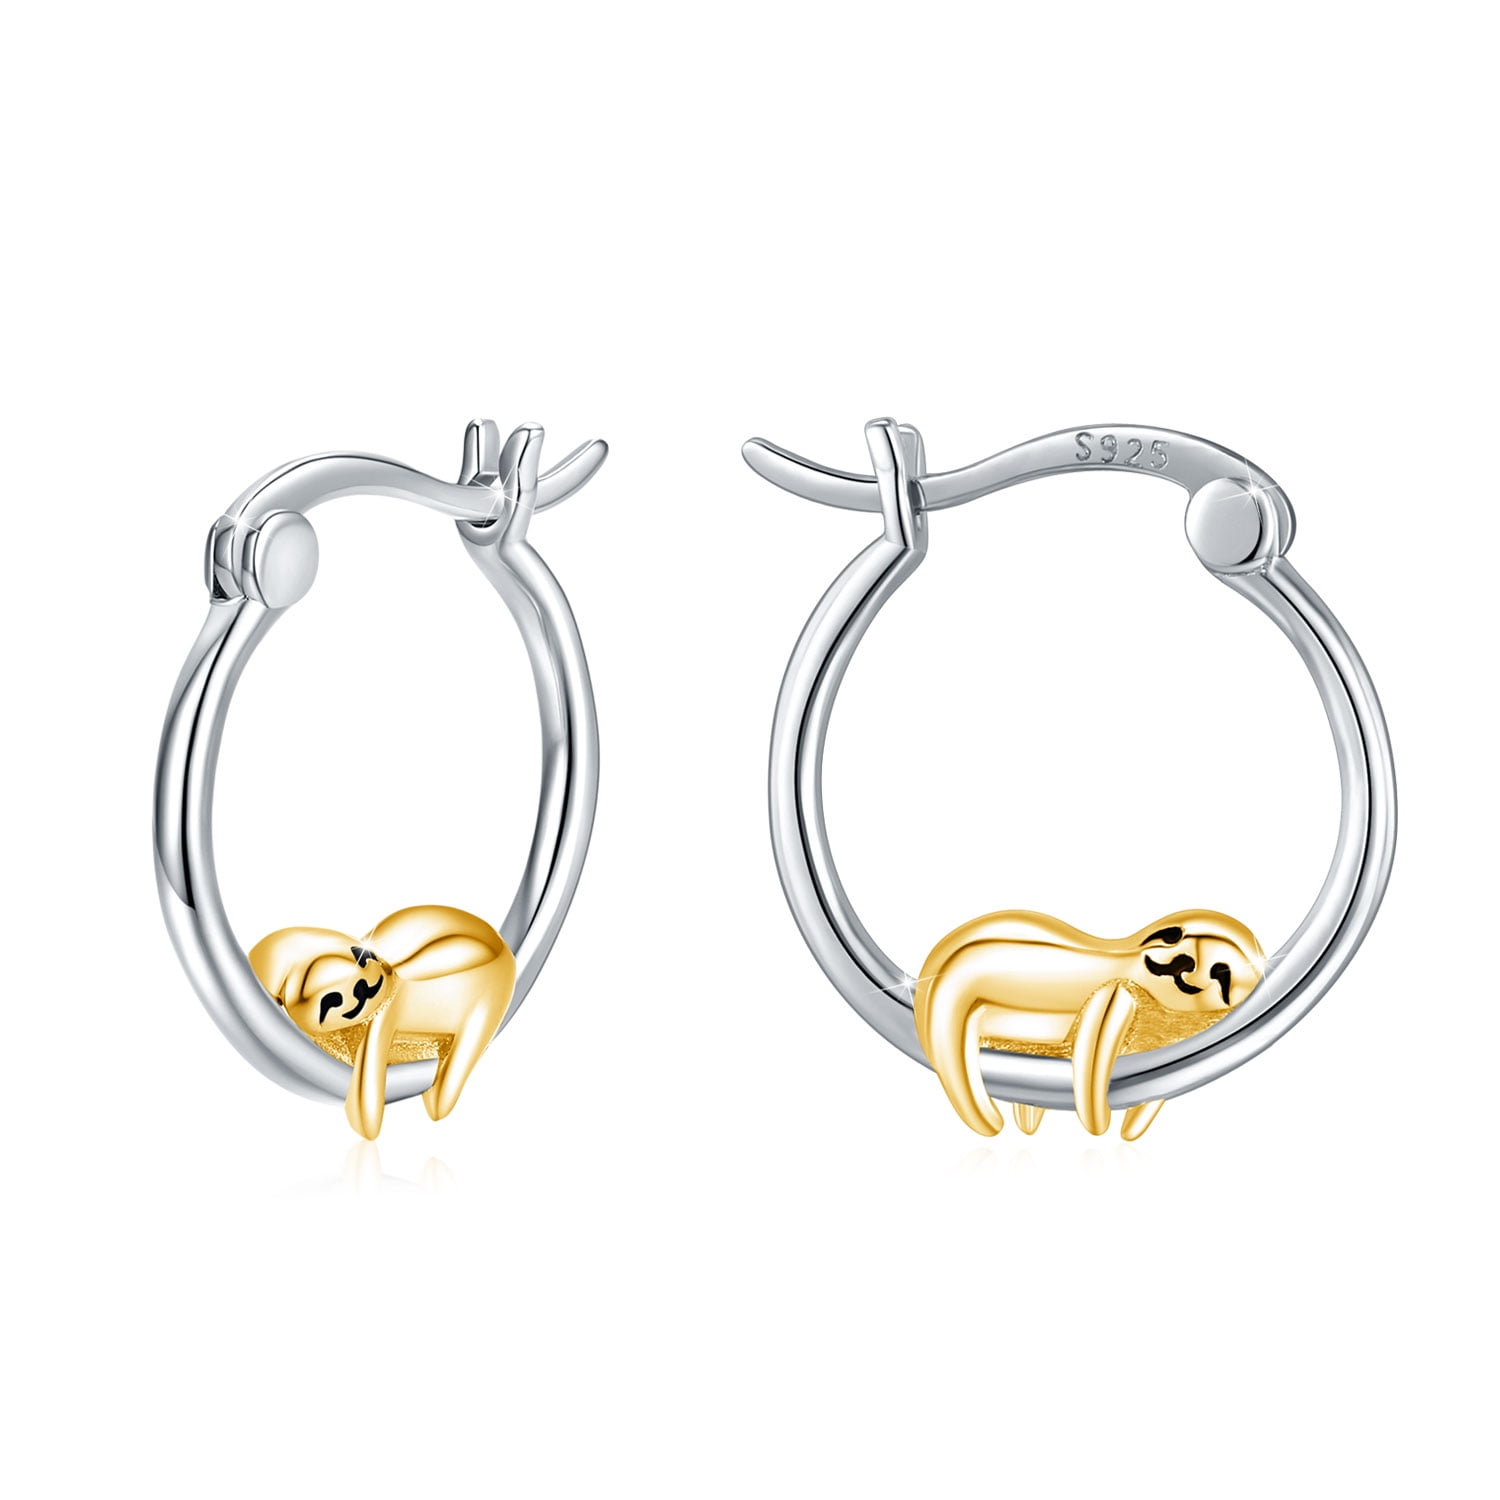 Youth Elephant Earrings with Safety Backs & Gift Box -90002759